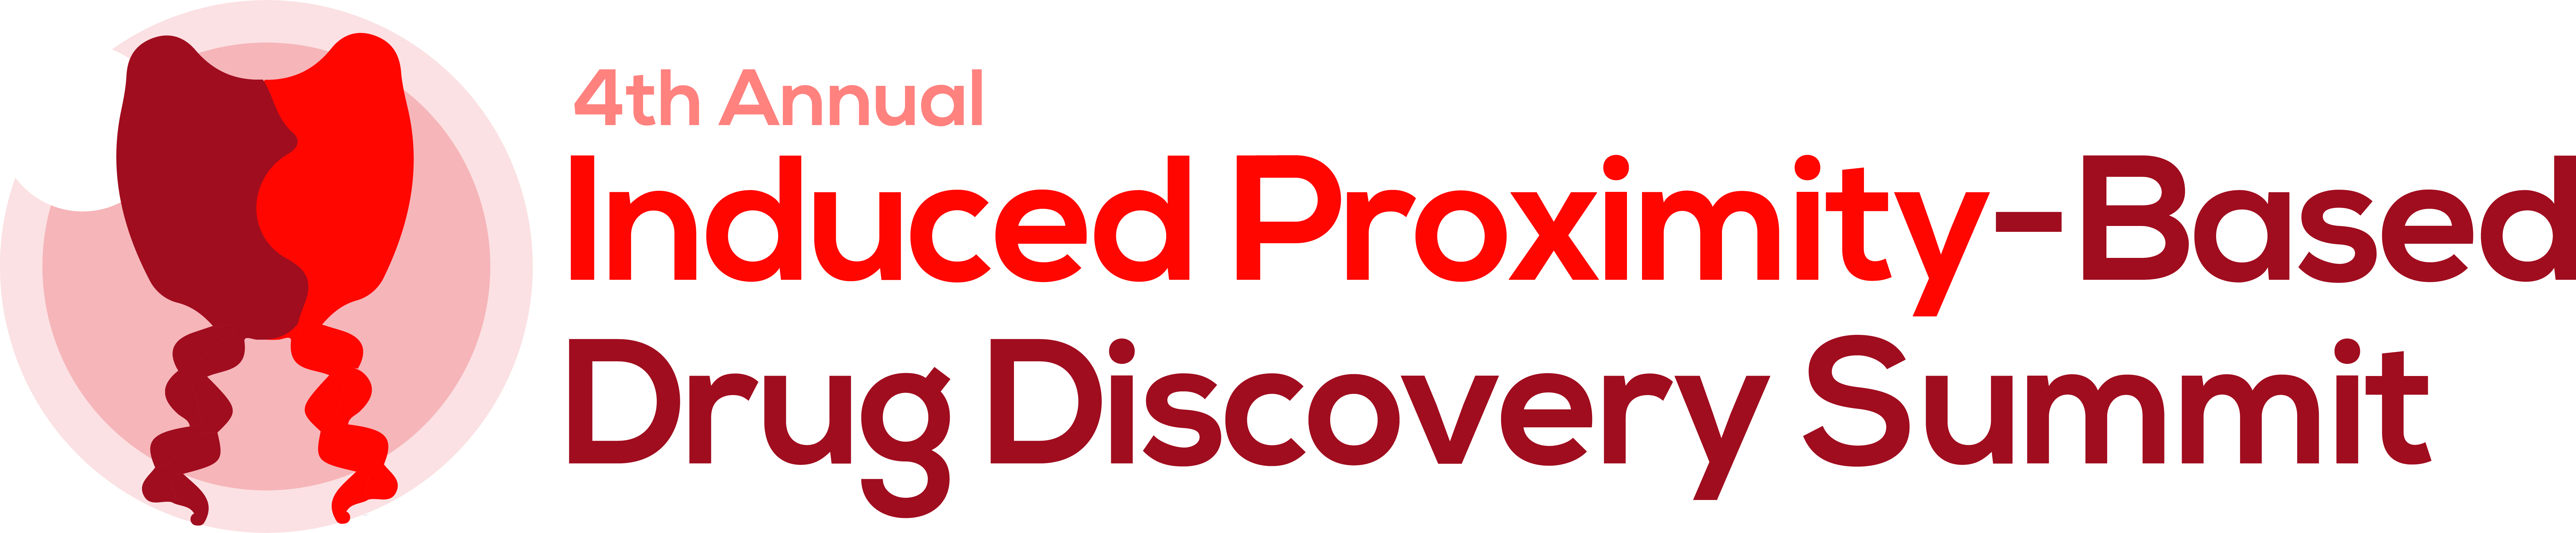 4th Induced Proximity Based Drug Discovery Summit